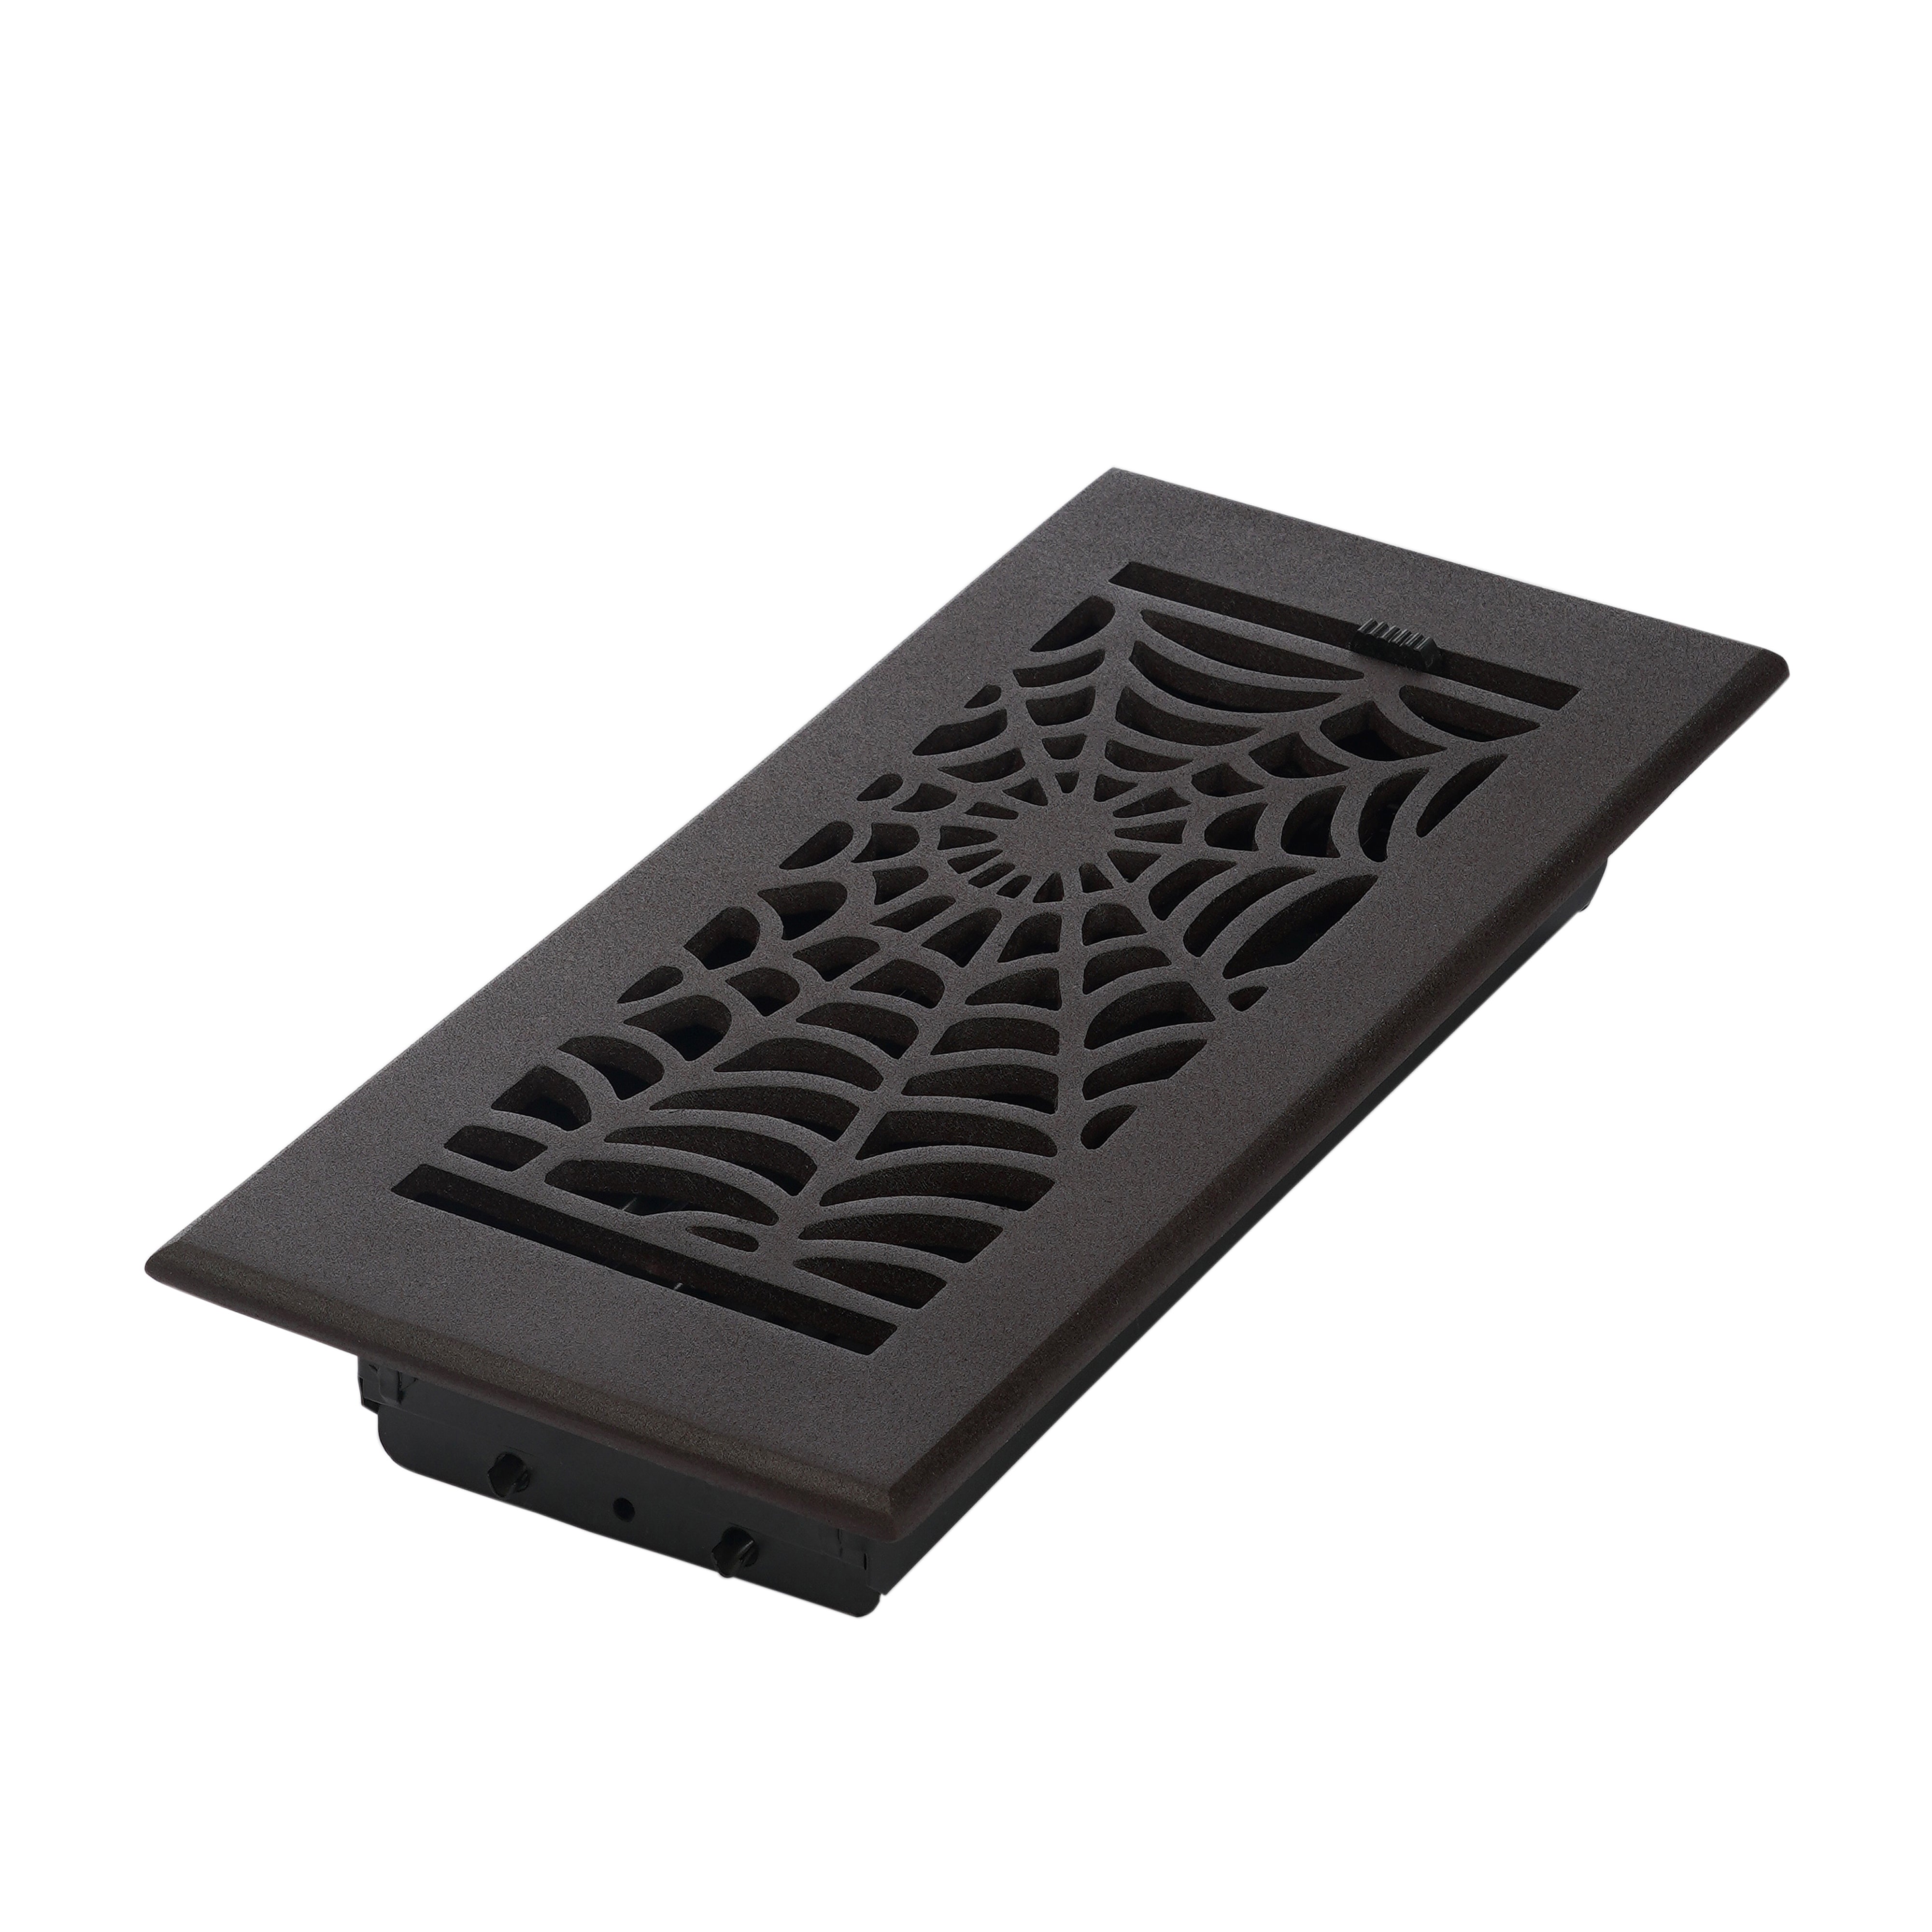 Spooky Gothic Vent cover 4"x 10" Duct Opening (Overall 5-1/2"x 11-3/4") in Spider Web Design | Solid Cast Aluminium Register Cover